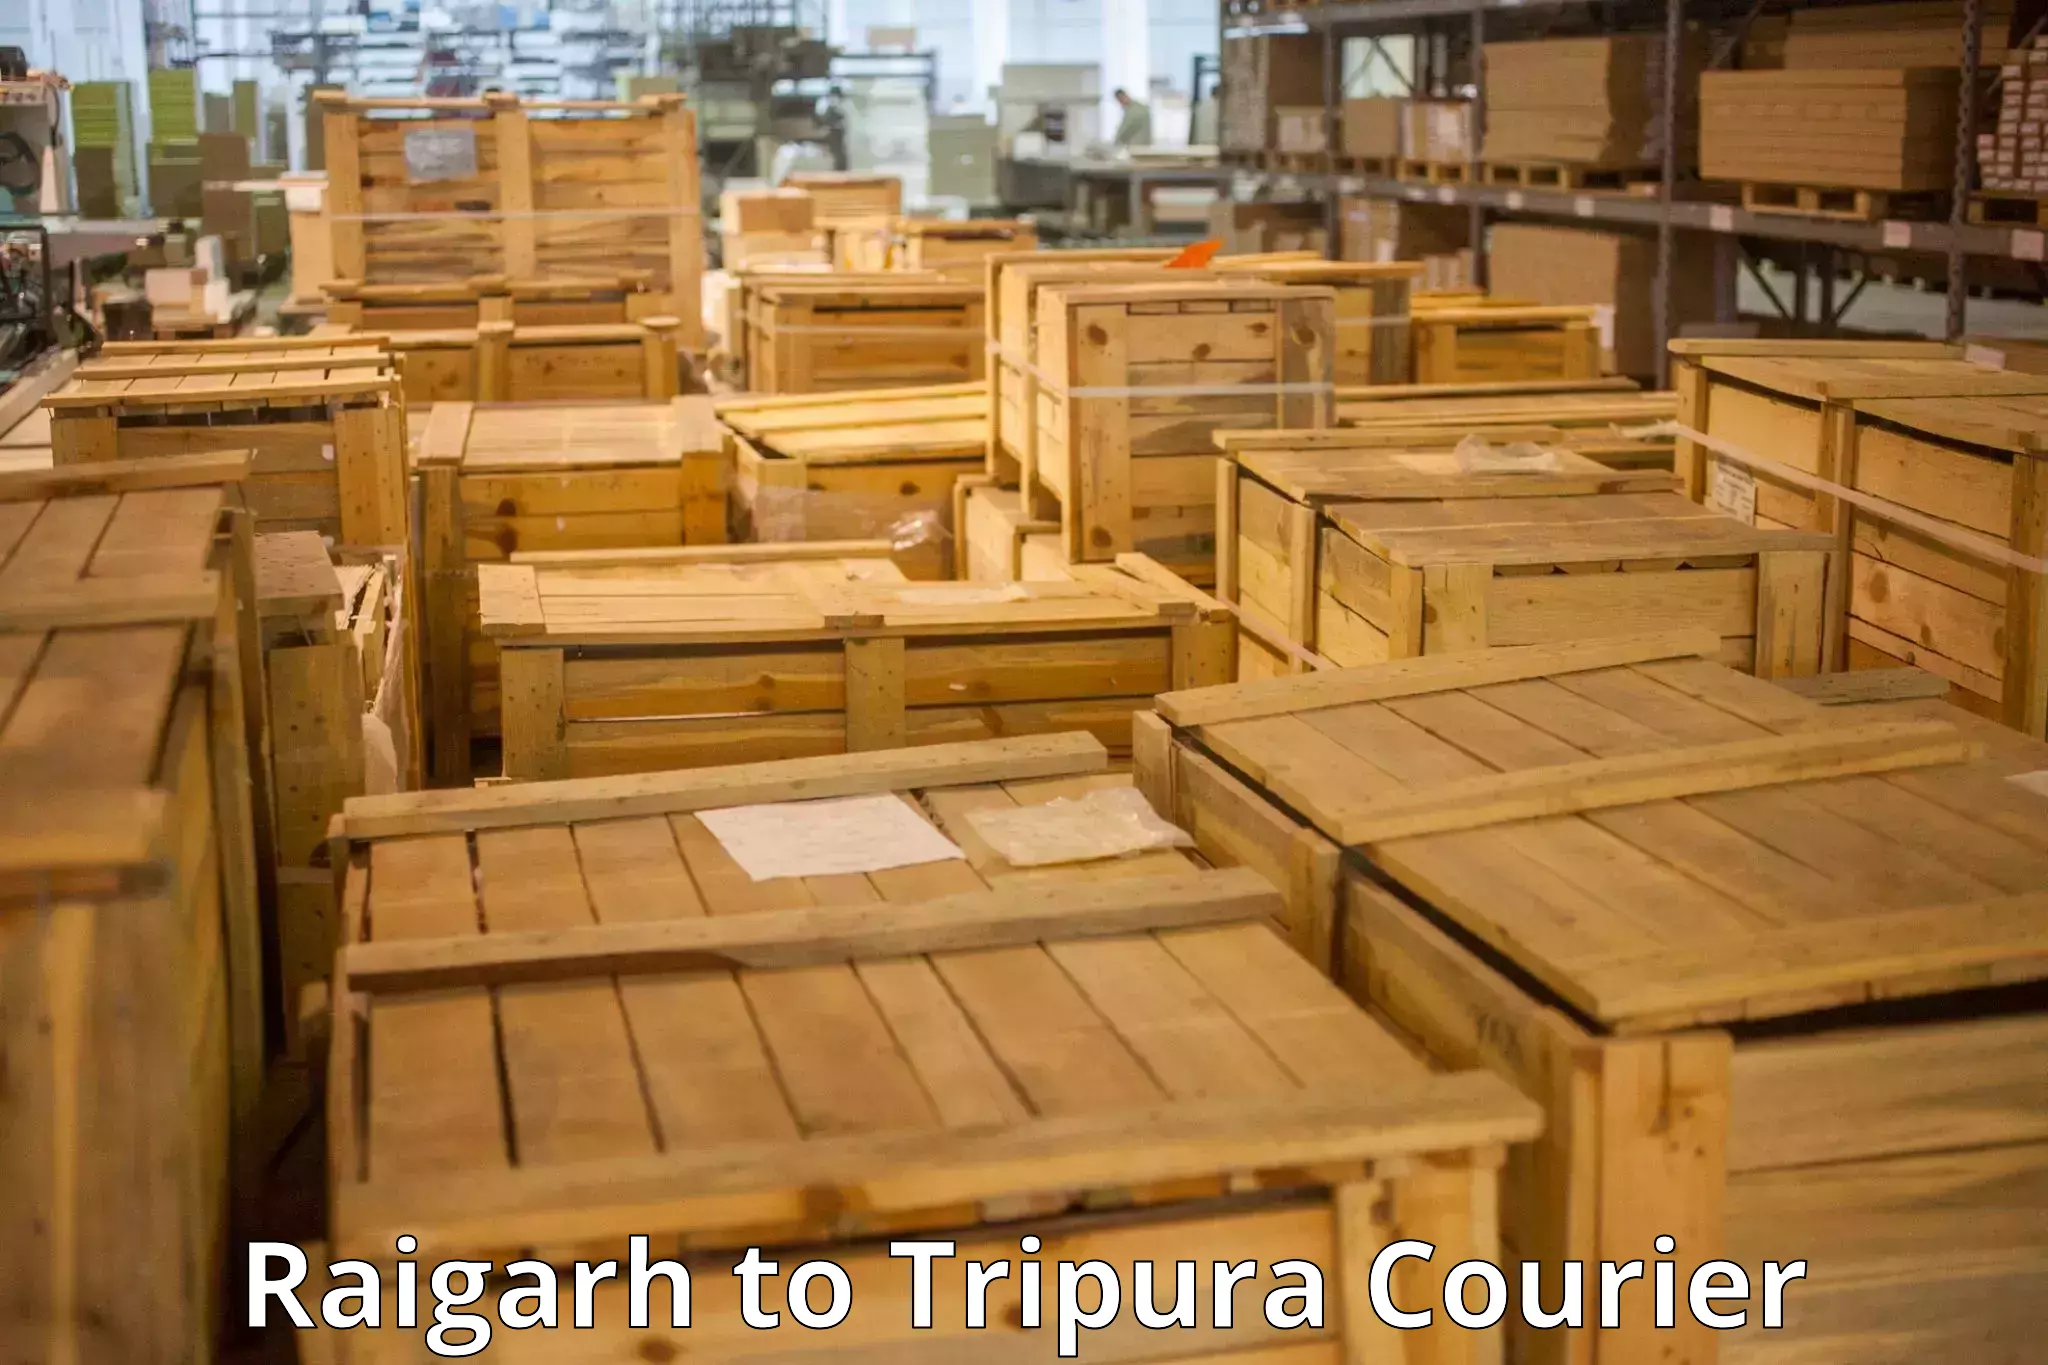 Safe luggage delivery in Raigarh to Udaipur Tripura